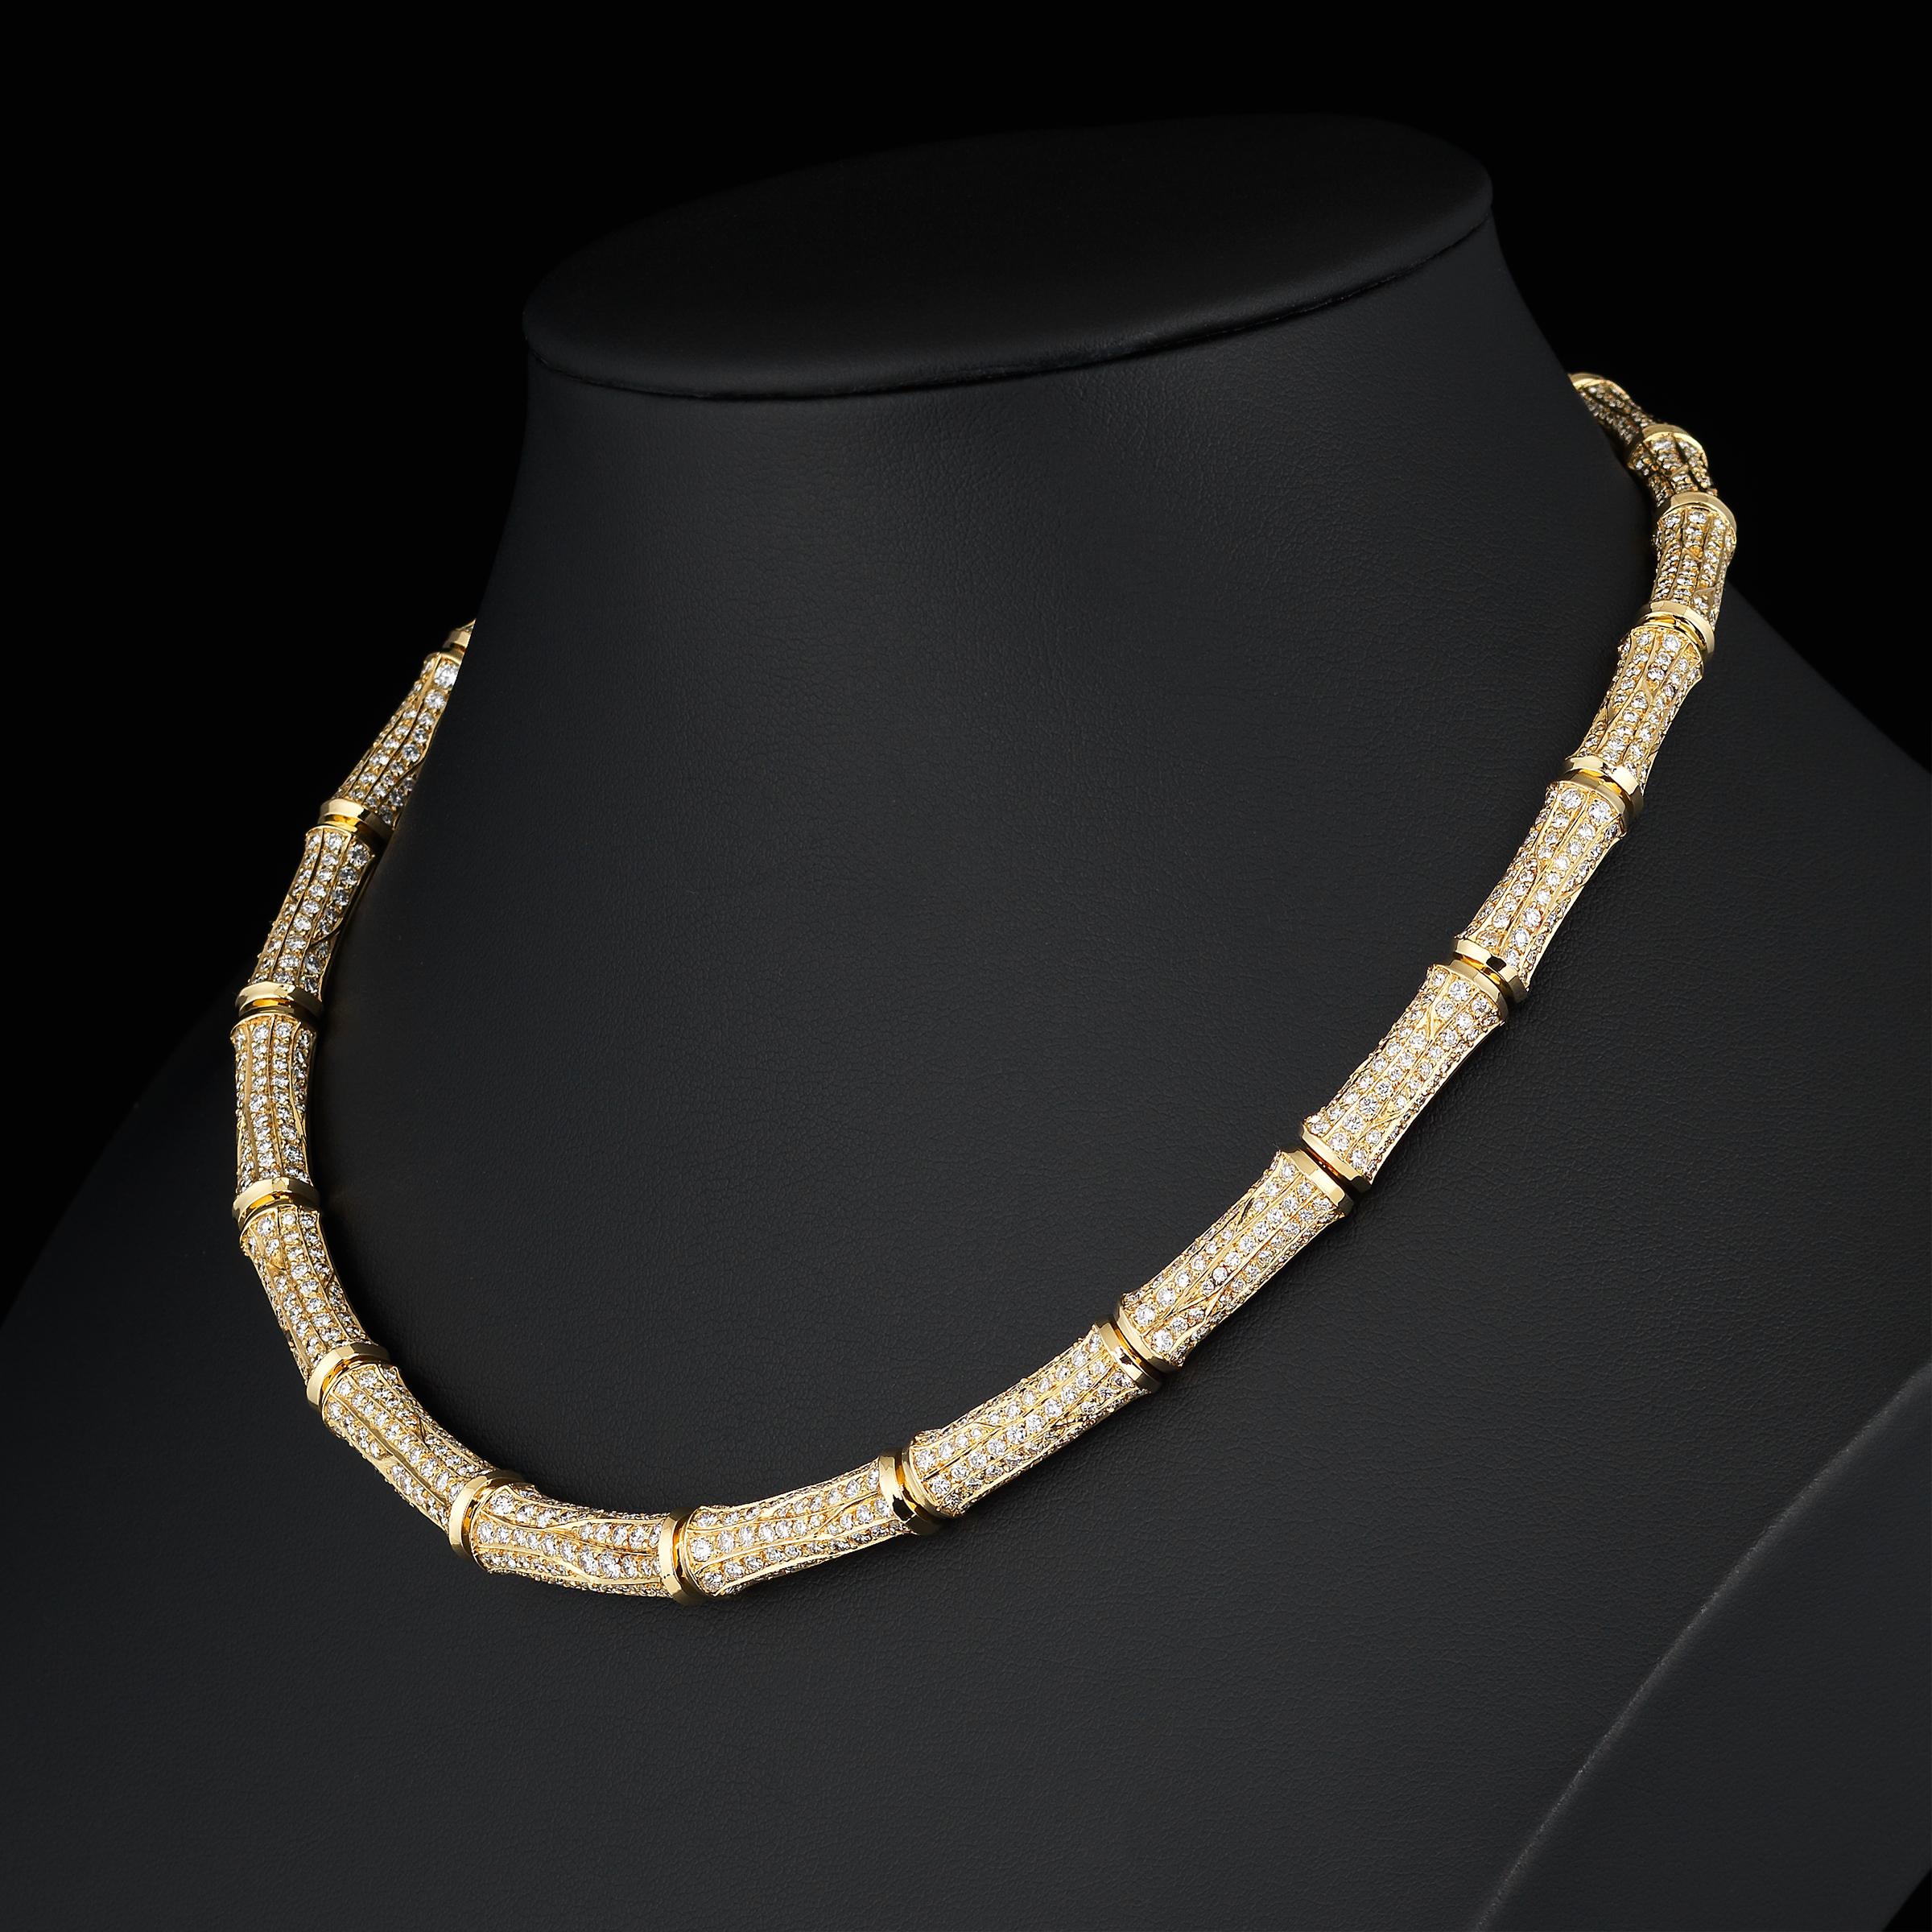 Round Cut Cartier Bamboo 26cts Diamond Suite in 18K Gold Necklace and Earrings For Sale